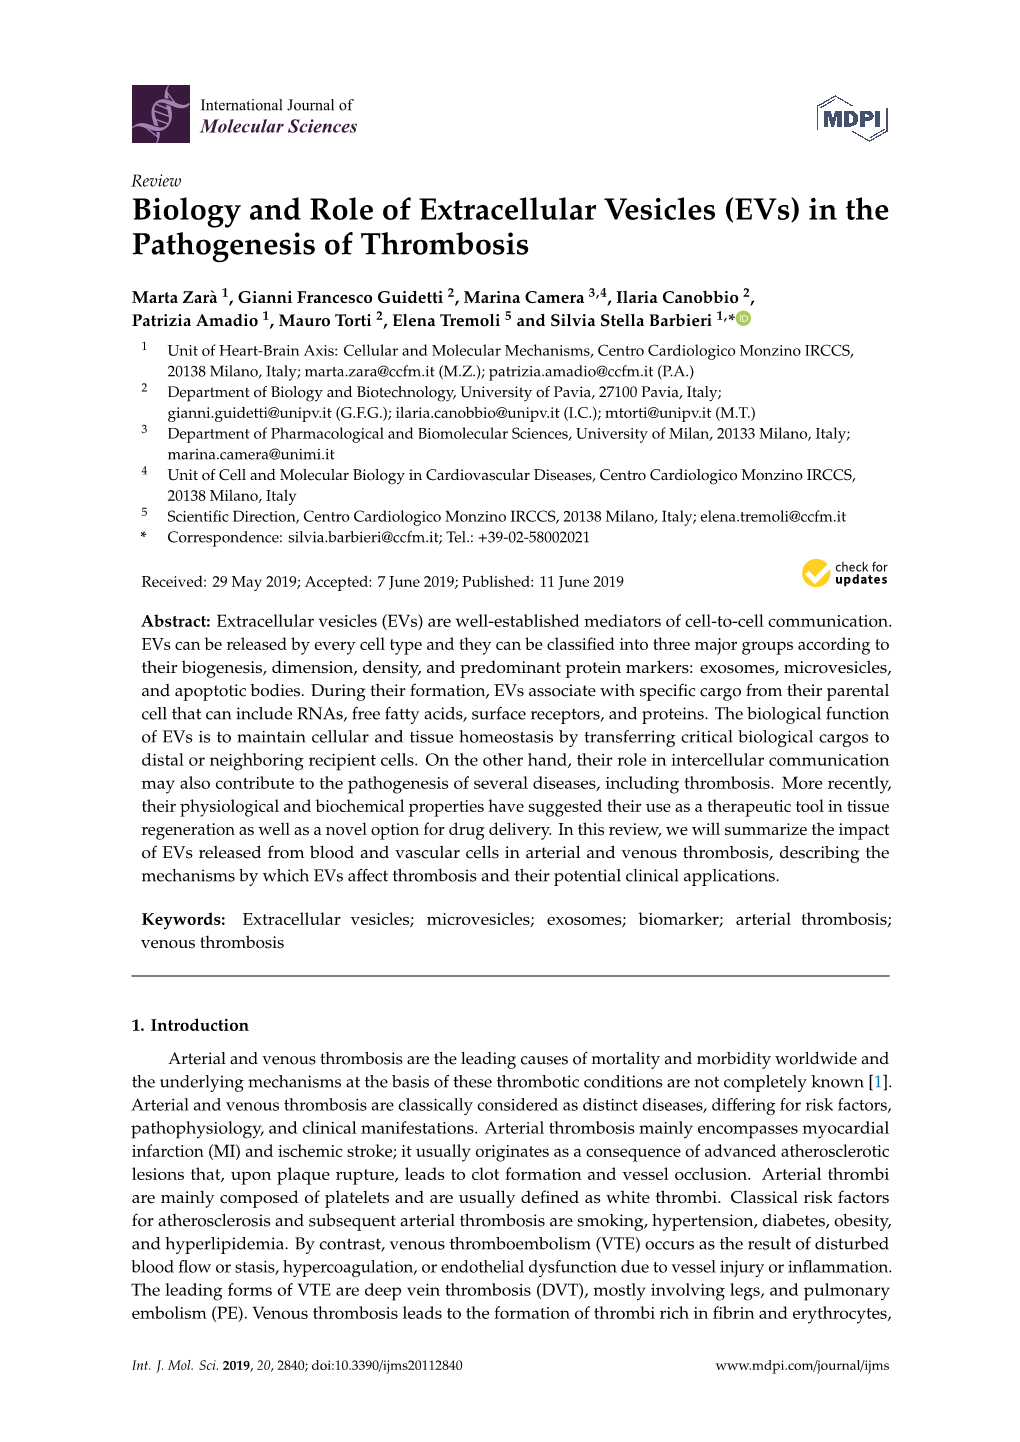 Biology and Role of Extracellular Vesicles (Evs) in the Pathogenesis of Thrombosis